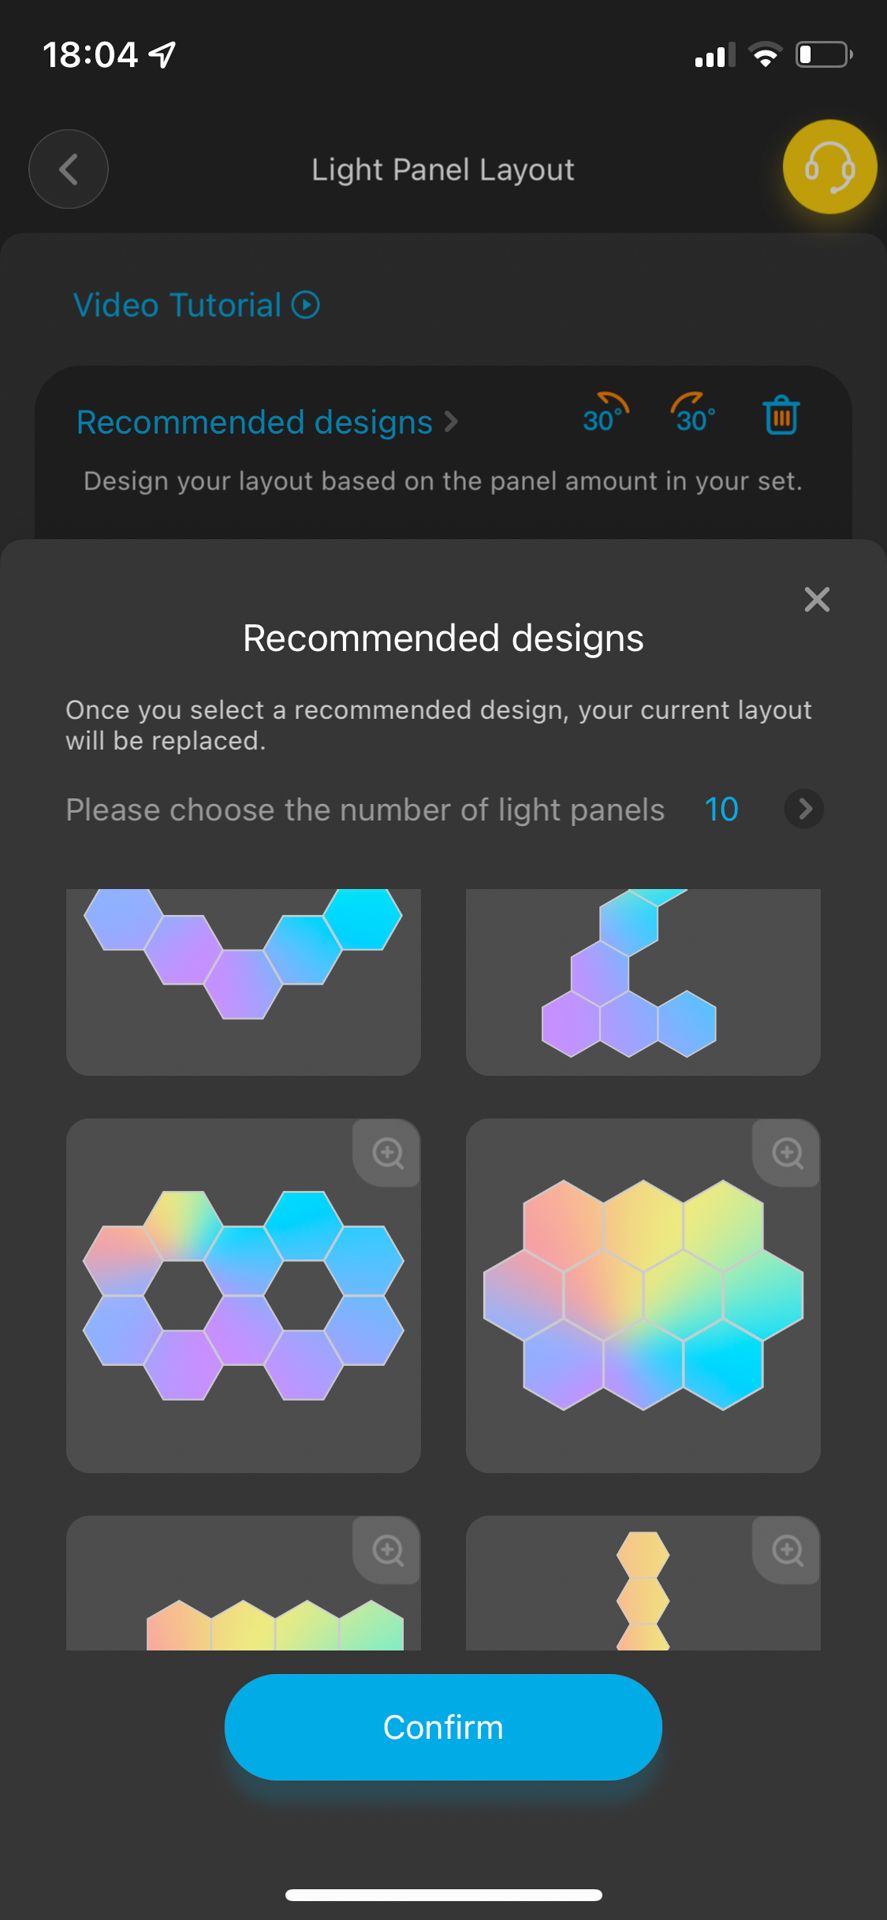 govee hexa screenshot - a - recommended